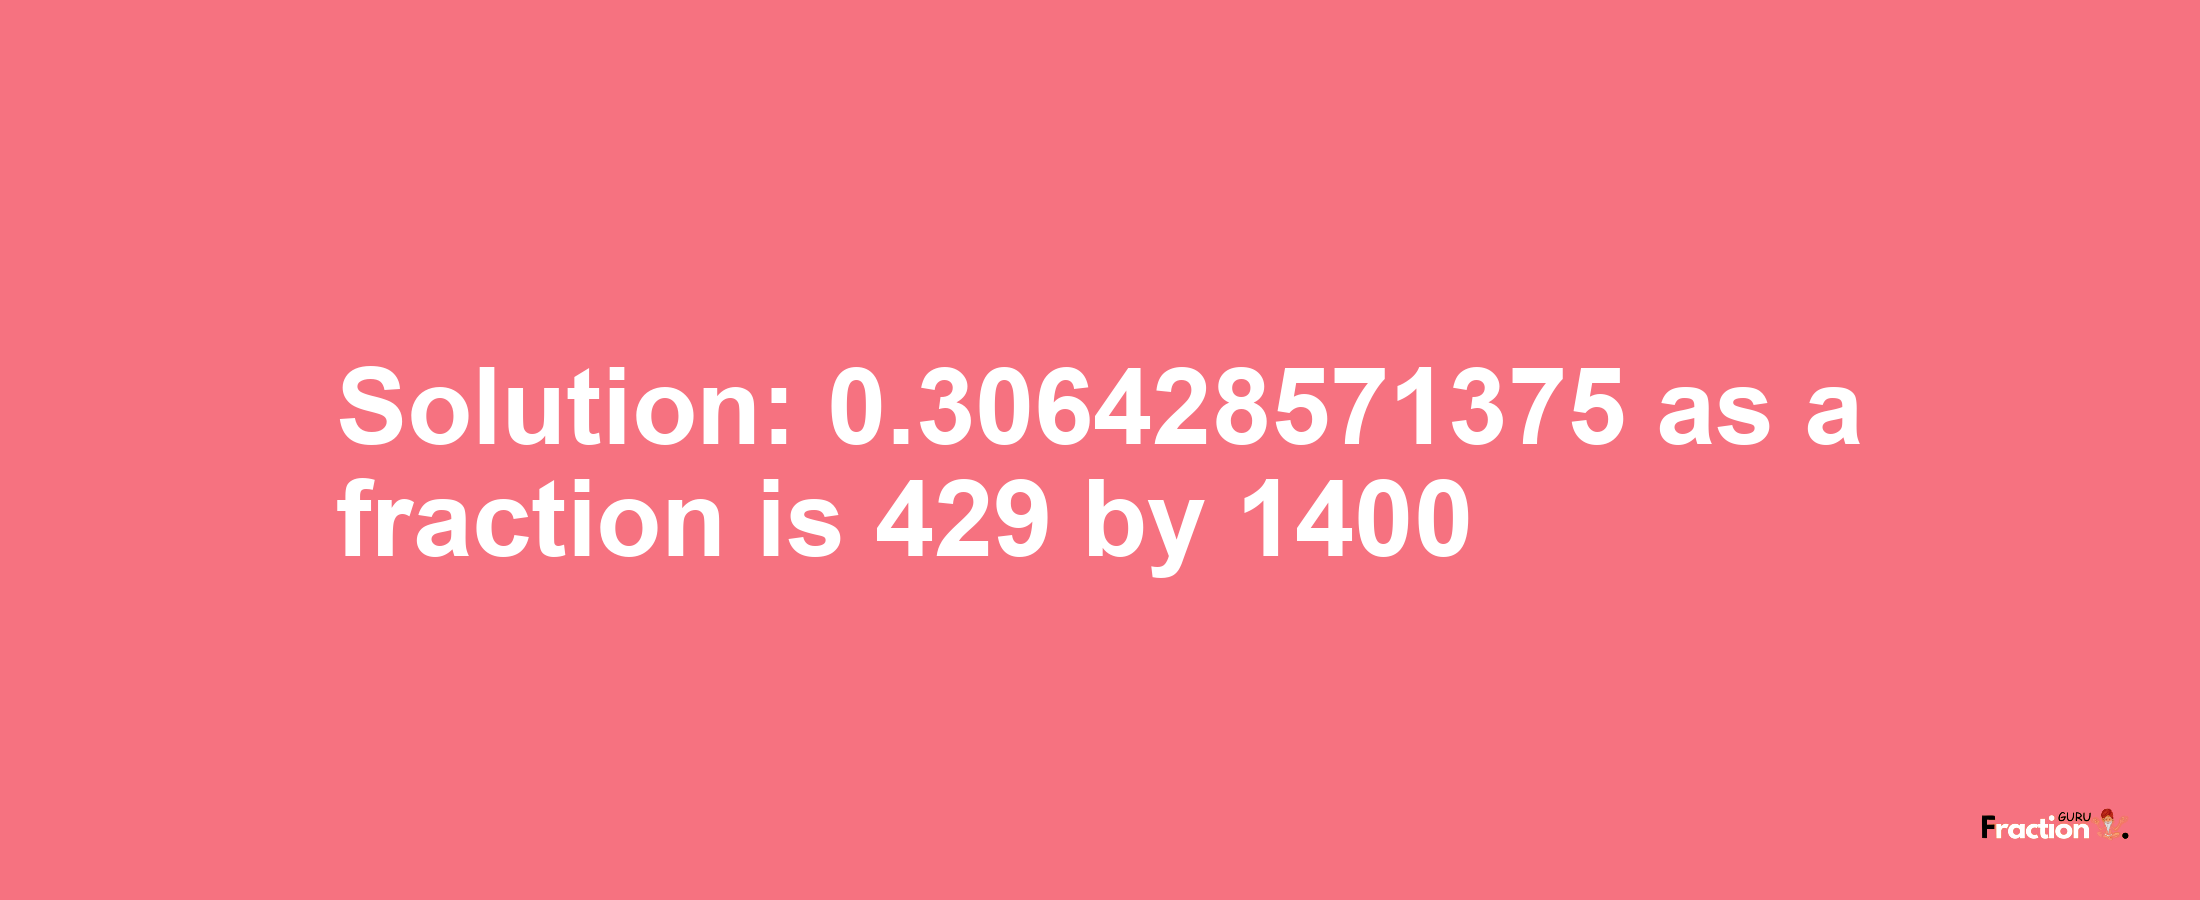 Solution:0.306428571375 as a fraction is 429/1400